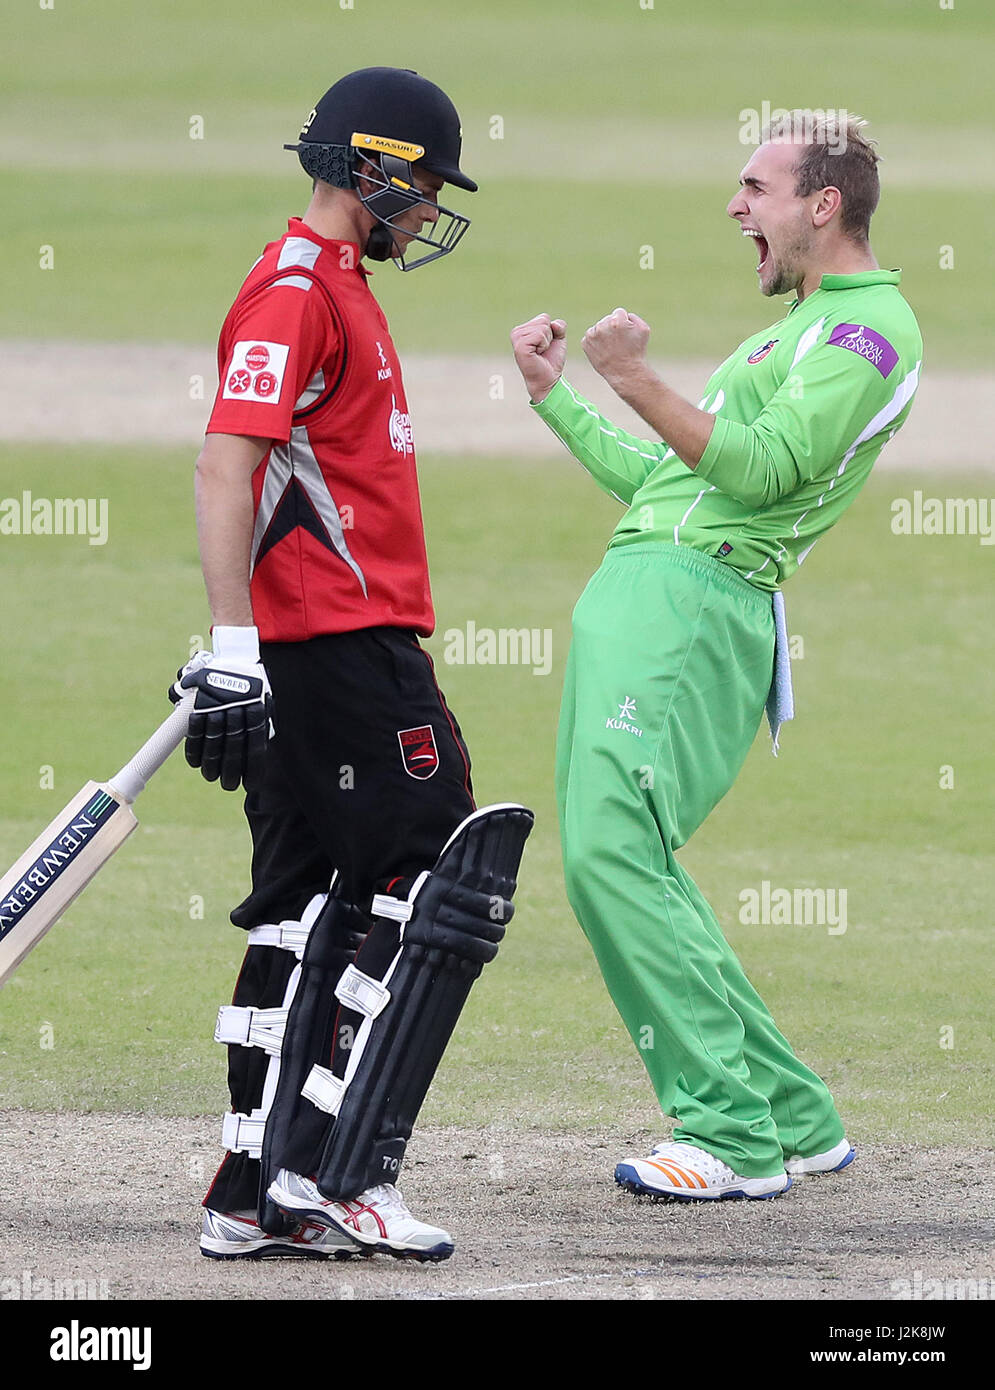 Lancashire's Liam Livingstone celebrates taking the wicket of Leicestershire's Neil Dexter (left), during the Royal London One Day Cup match at Old Trafford, Manchester. Stock Photo